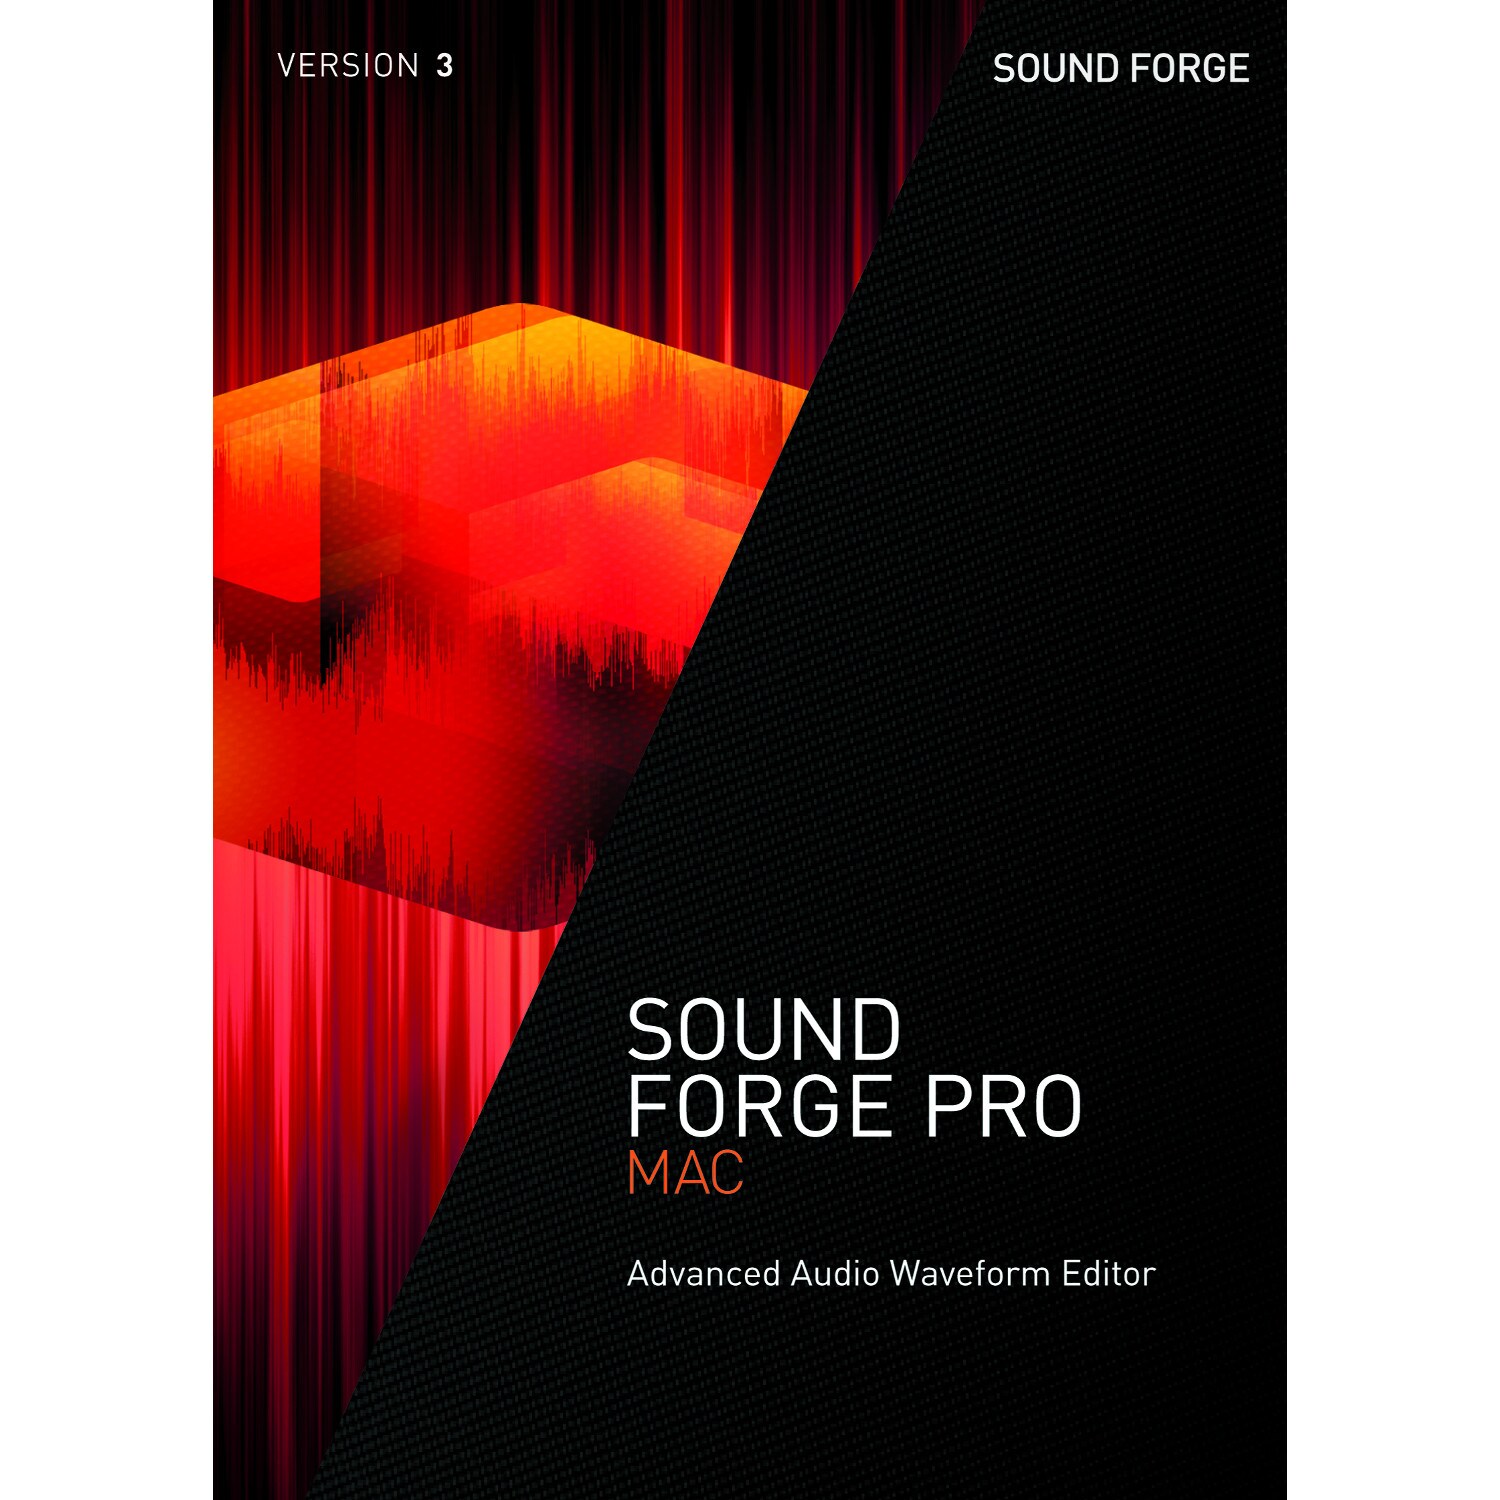 Sound forge pro 10 download